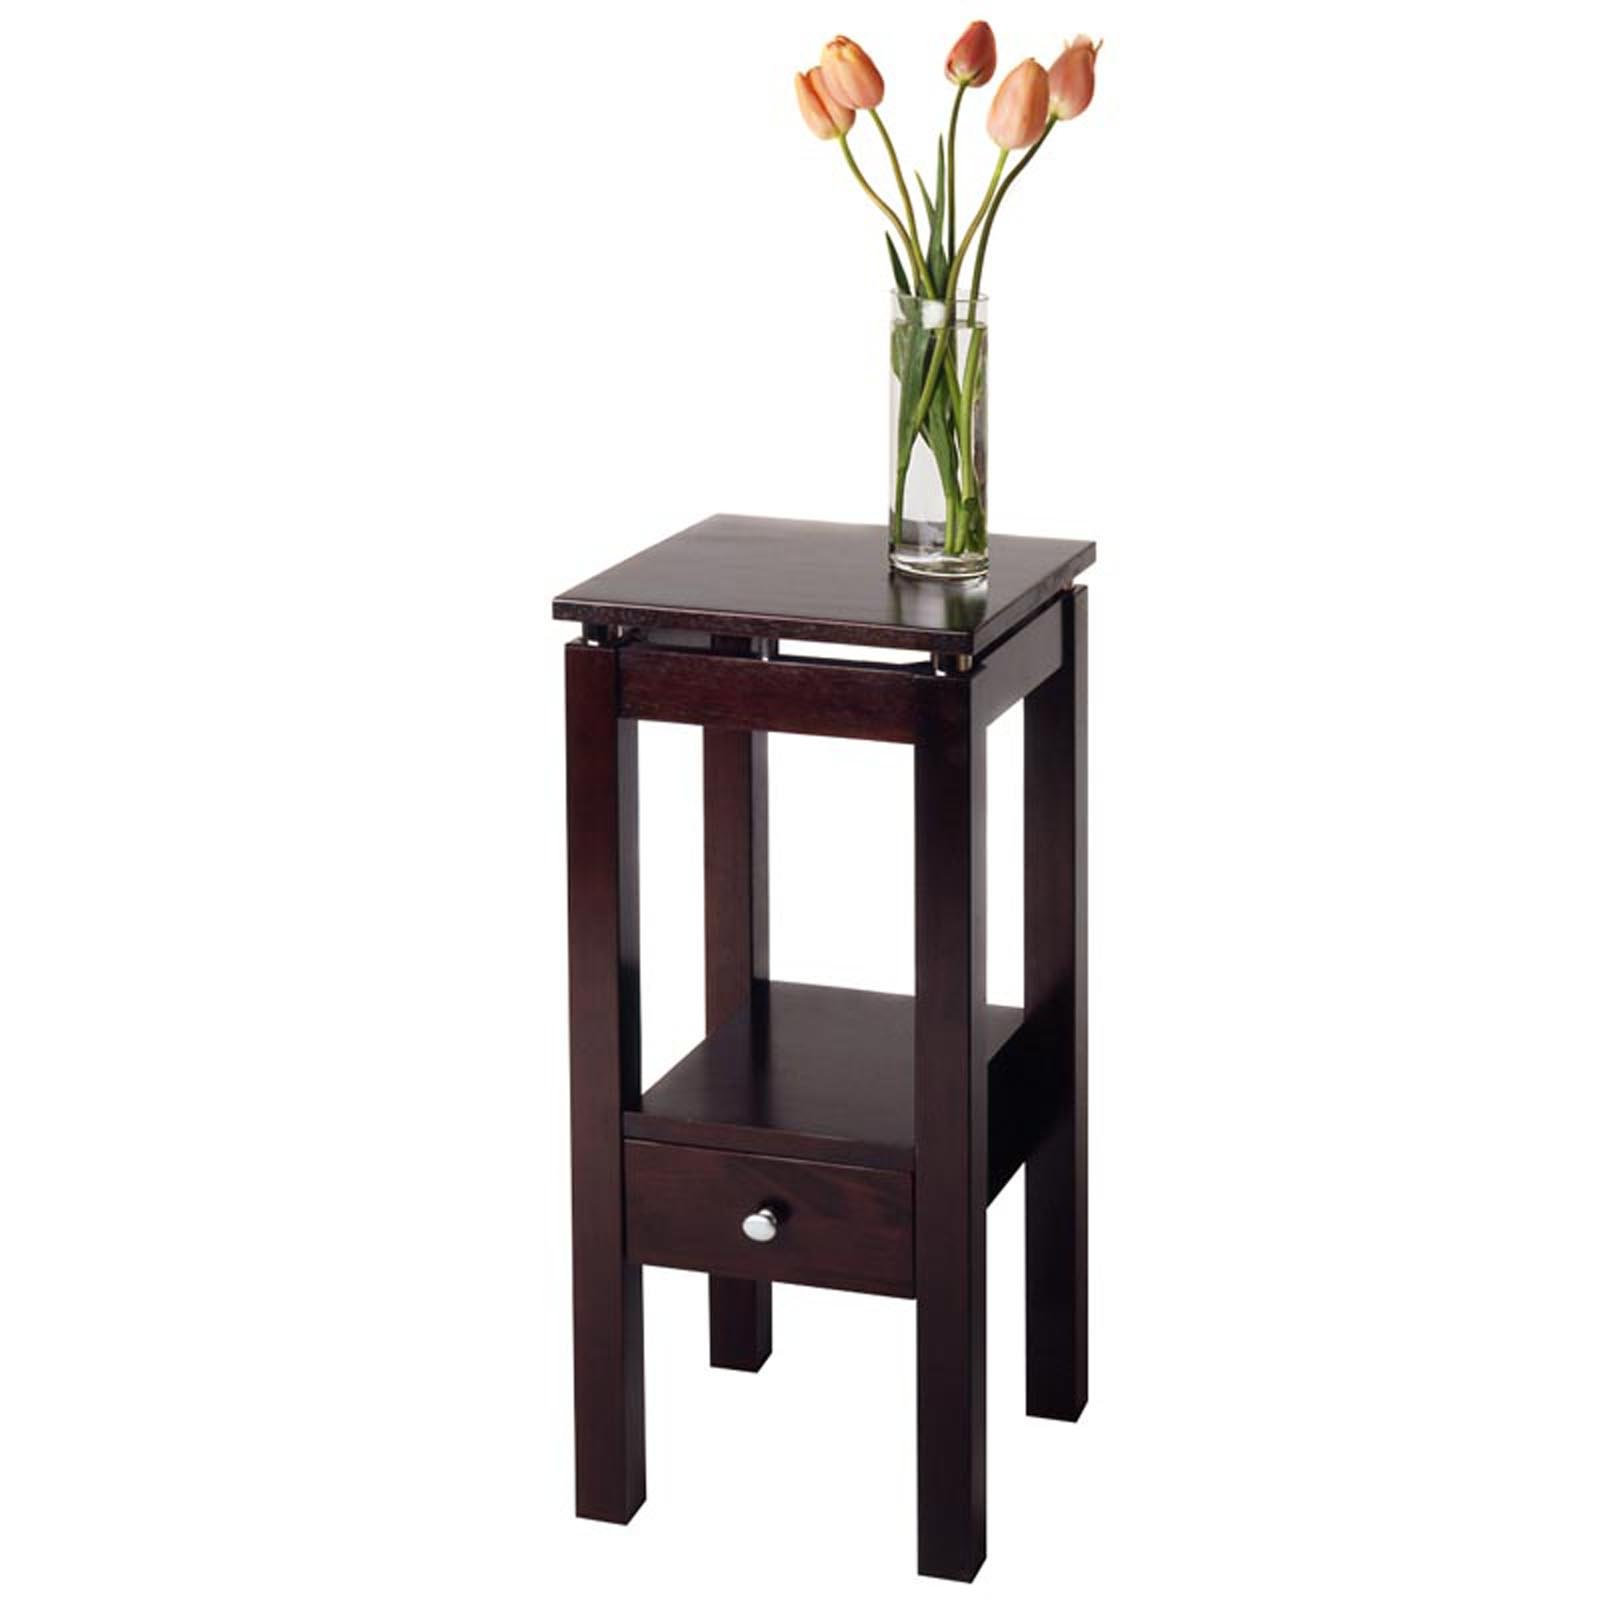 Living Room End Tables Furniture for Small Living Room | Roy Home Design